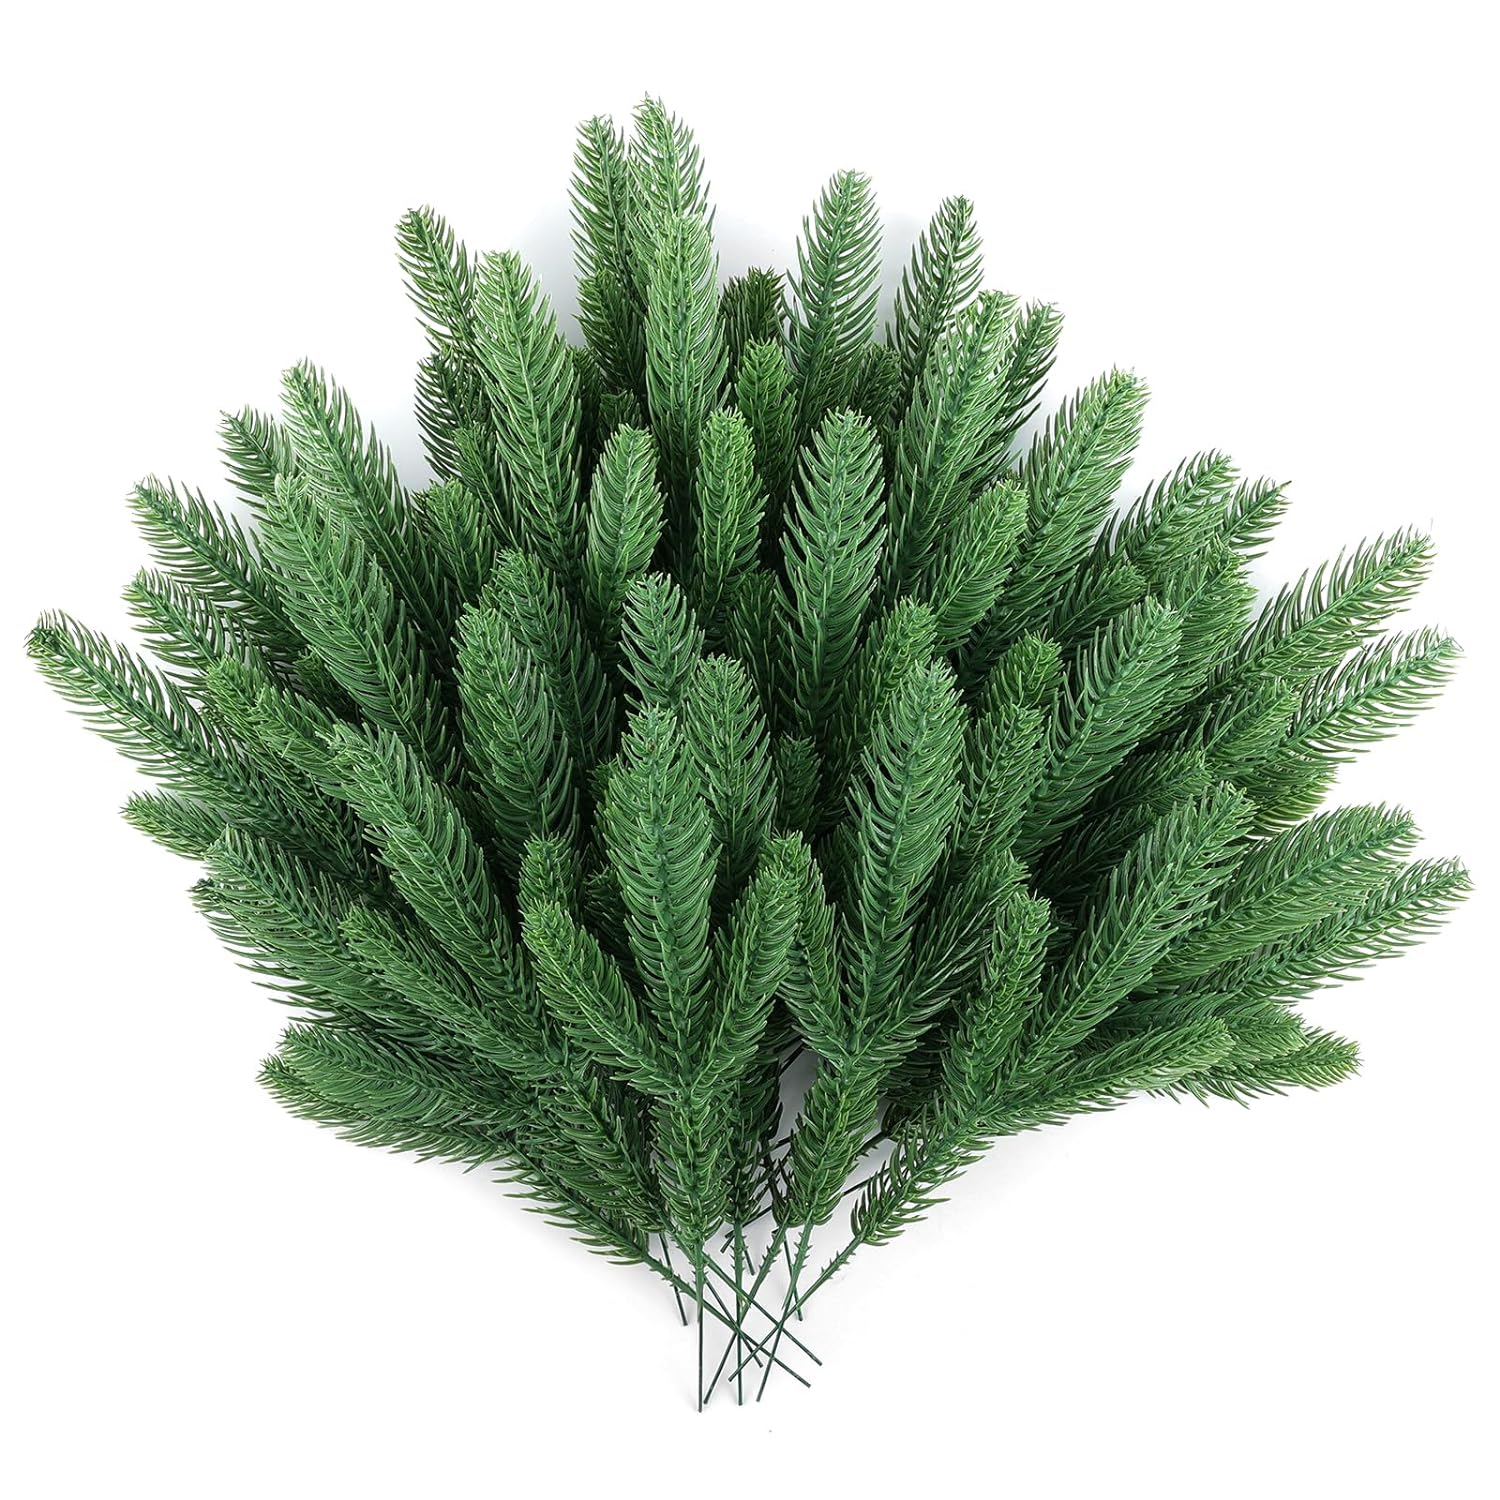 50 Pcs Artificial Pine Branches Christmas Greenery Plants Pine Needles DIY Cedar Picks and Sprays Accessories for Christmas Garland Wreath Craft and